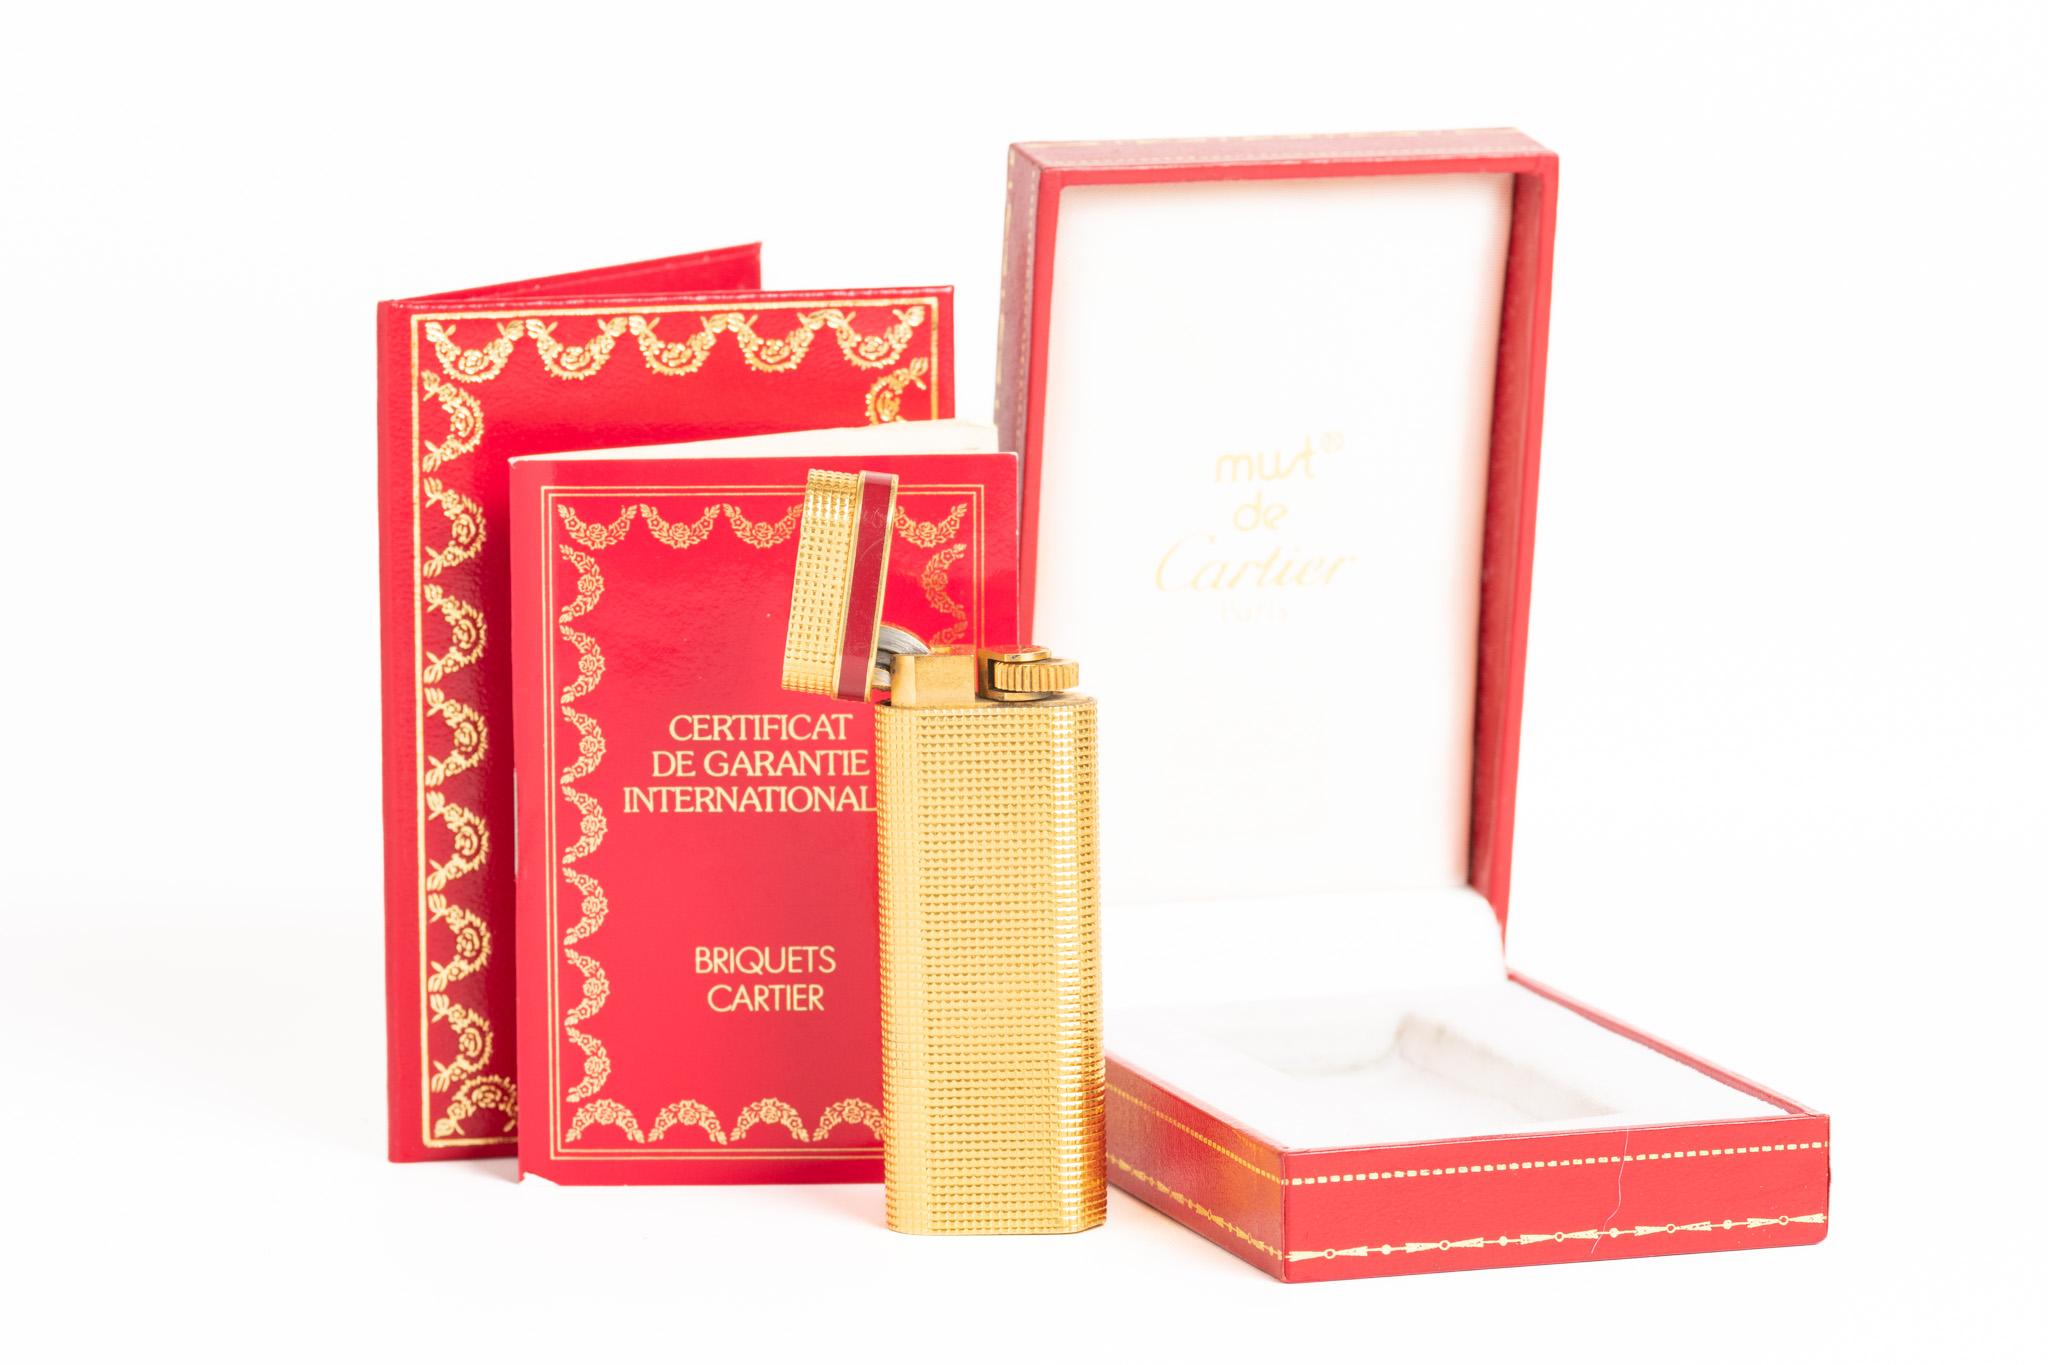 A rare and classic gold-plated Cartier lighter with a red enameled band at the top. Inscribed with 'Cartier Paris' along the bottom edge with a serial number: 94263V. The lighter has a beautiful geometric pattern. The lighter comes with an original